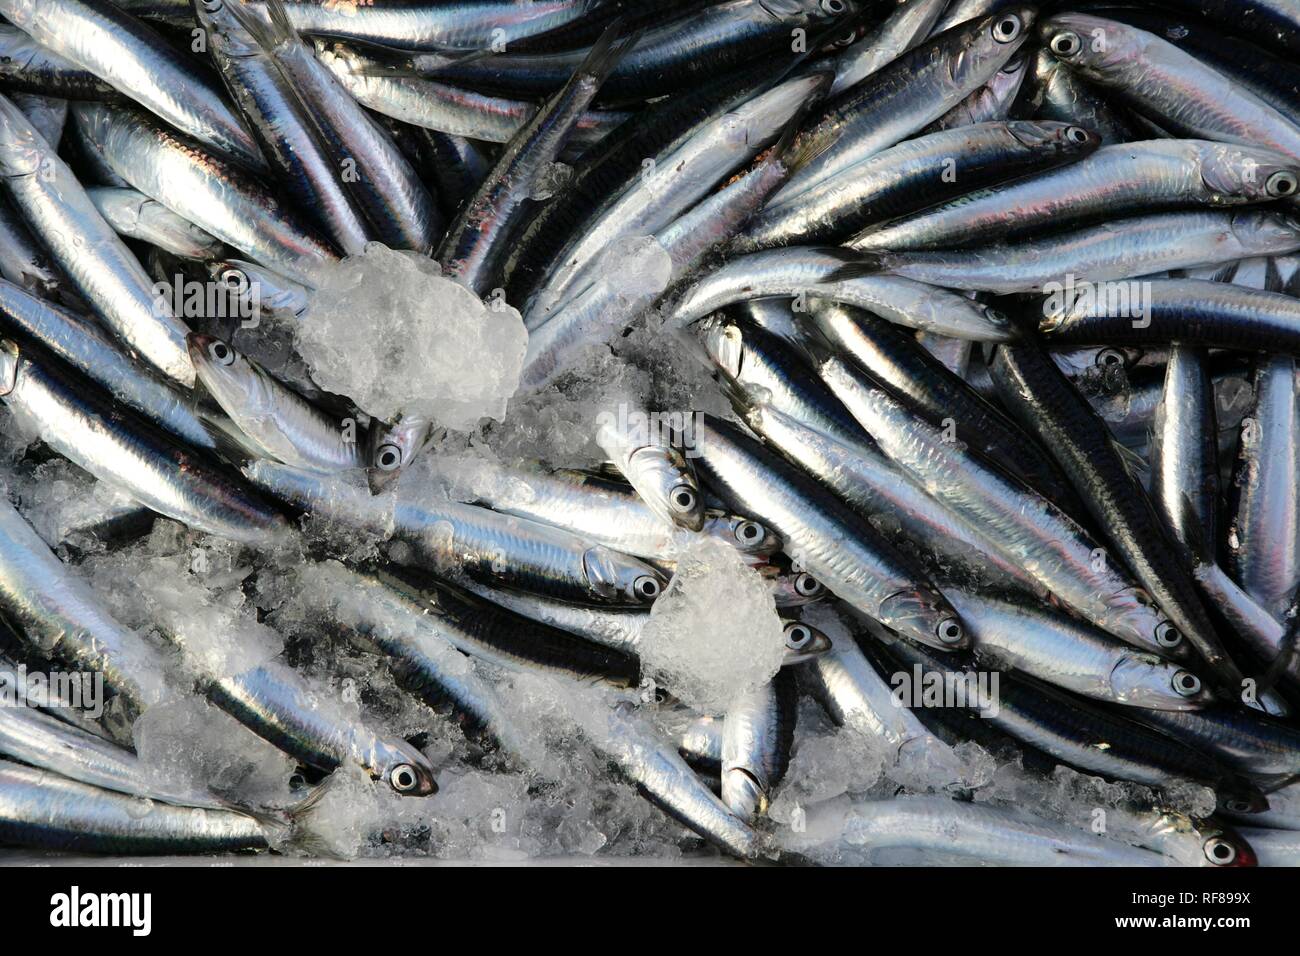 The day's haul on sardine fishing boat 'Jastreb, ' based in Kali on Ugljan Island, at a fishing site off of Pag Island in the Stock Photo